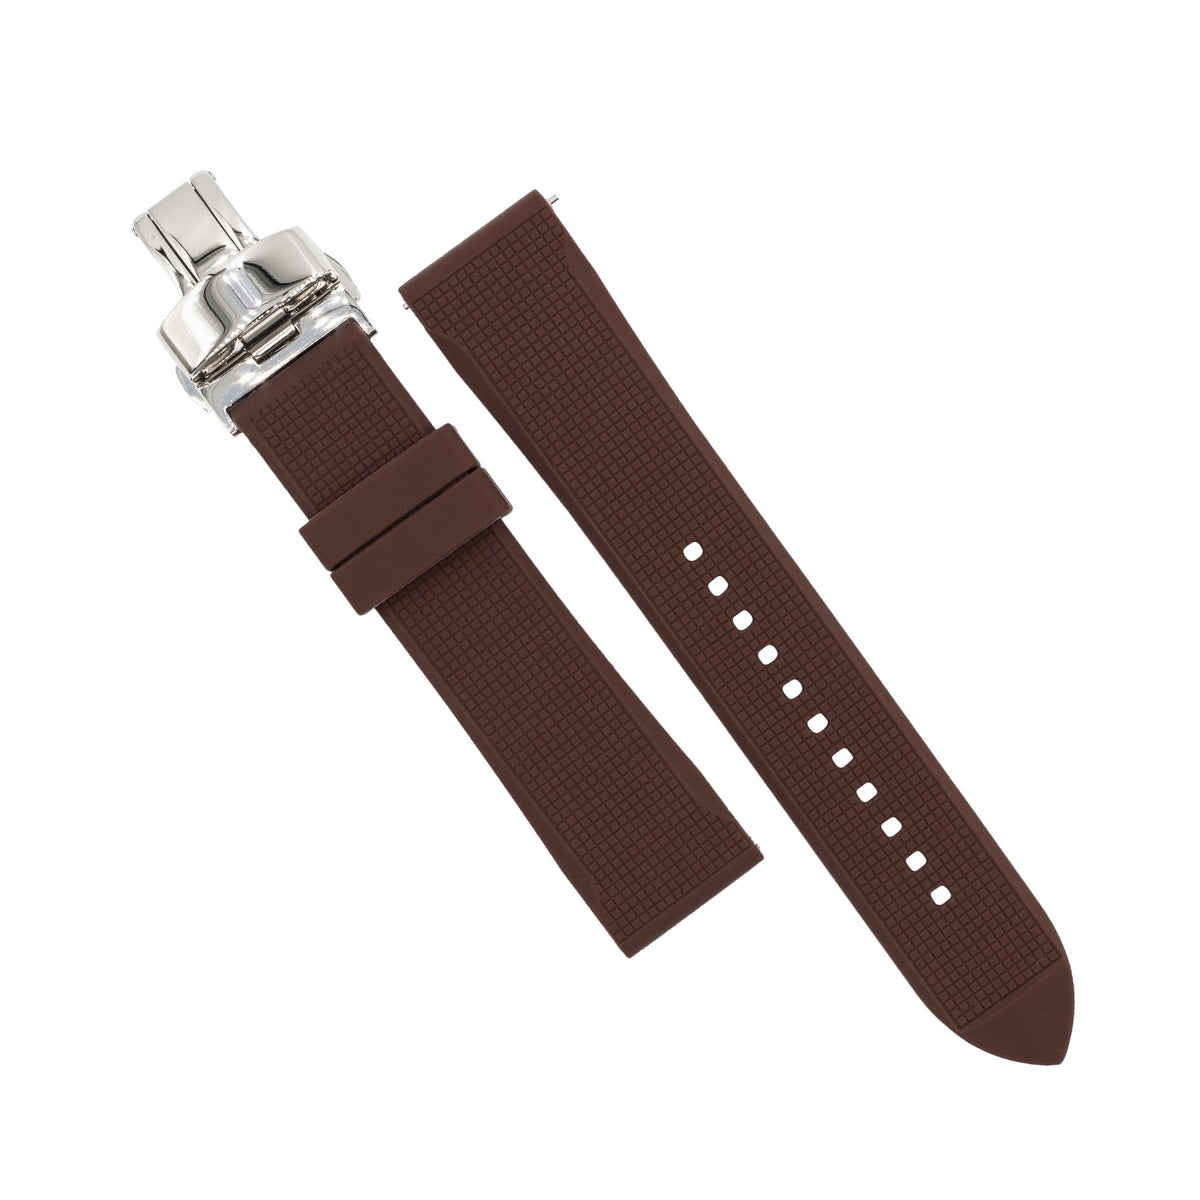 Silicone Rubber Strap w/ Butterfly Clasp in Brown (18mm) - Nomad Watch Works SG